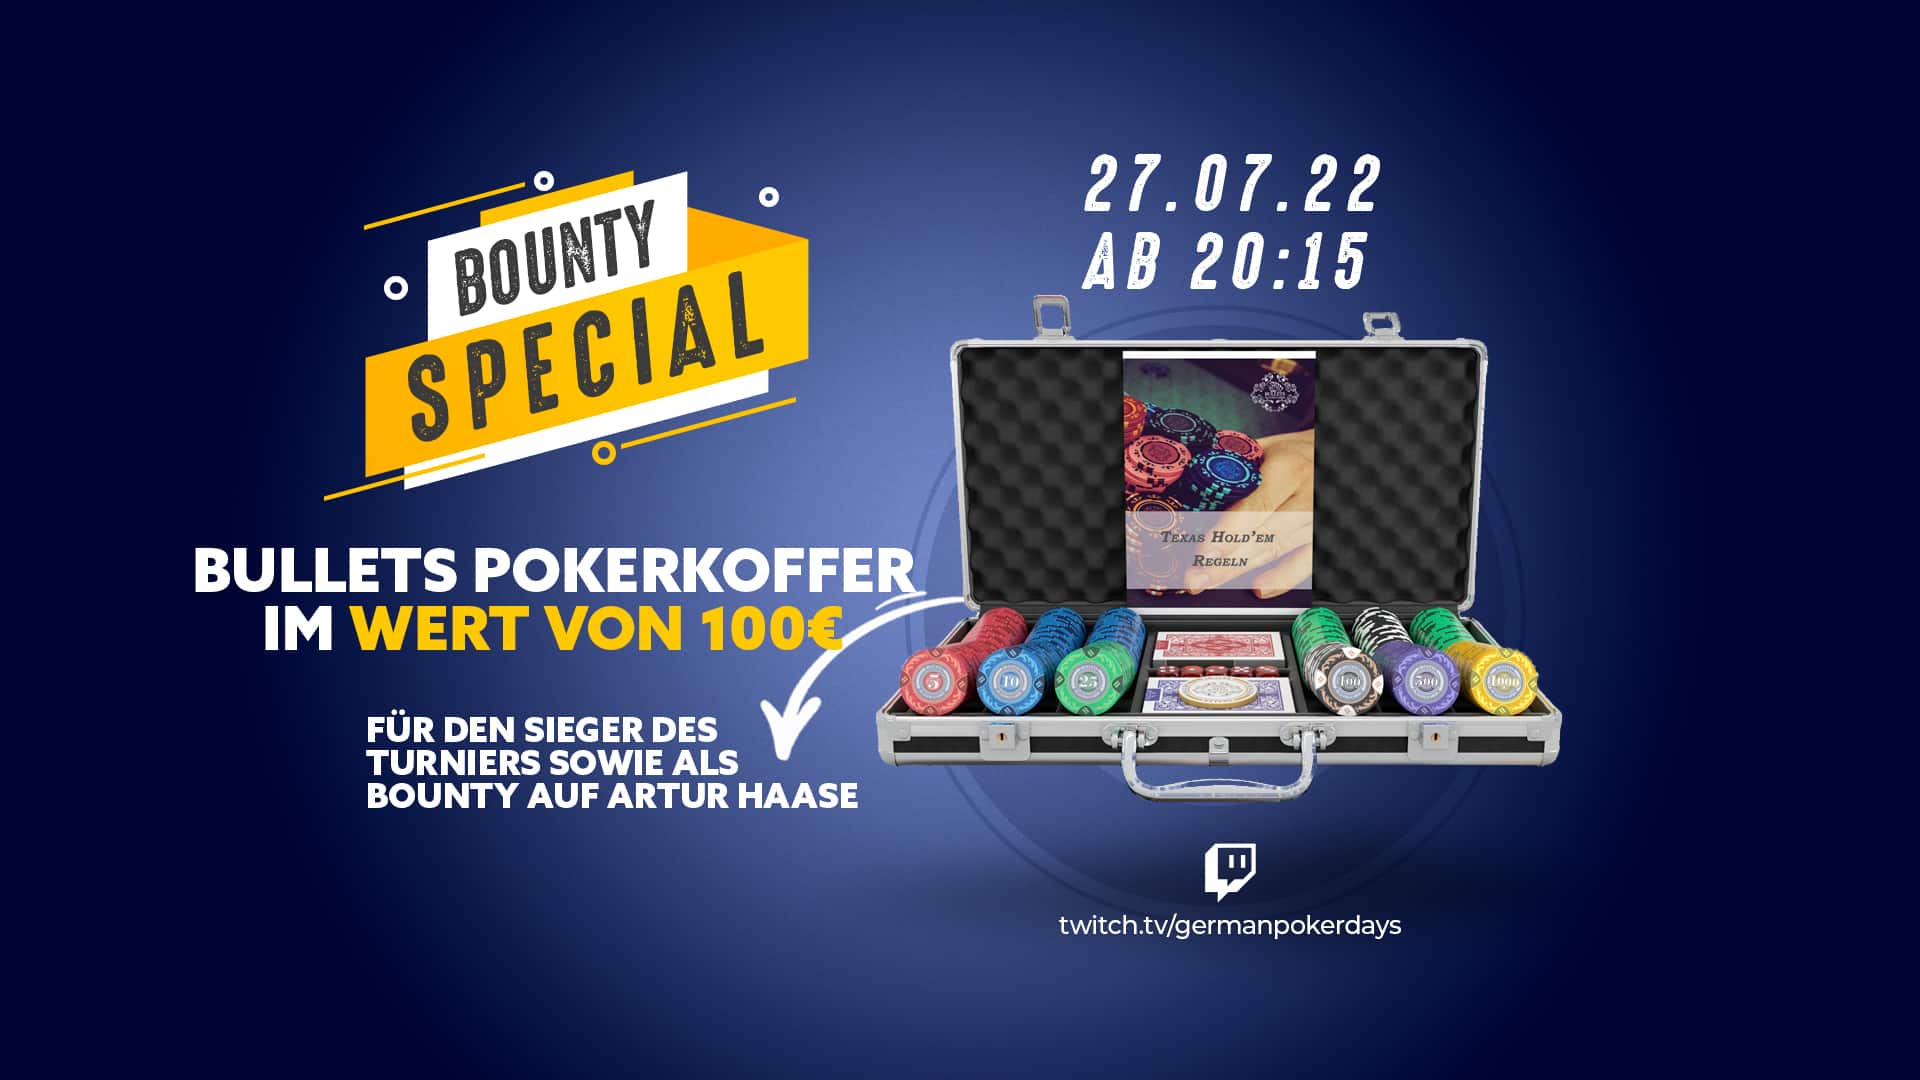 Bullets Pokerkoffer Bounty Special